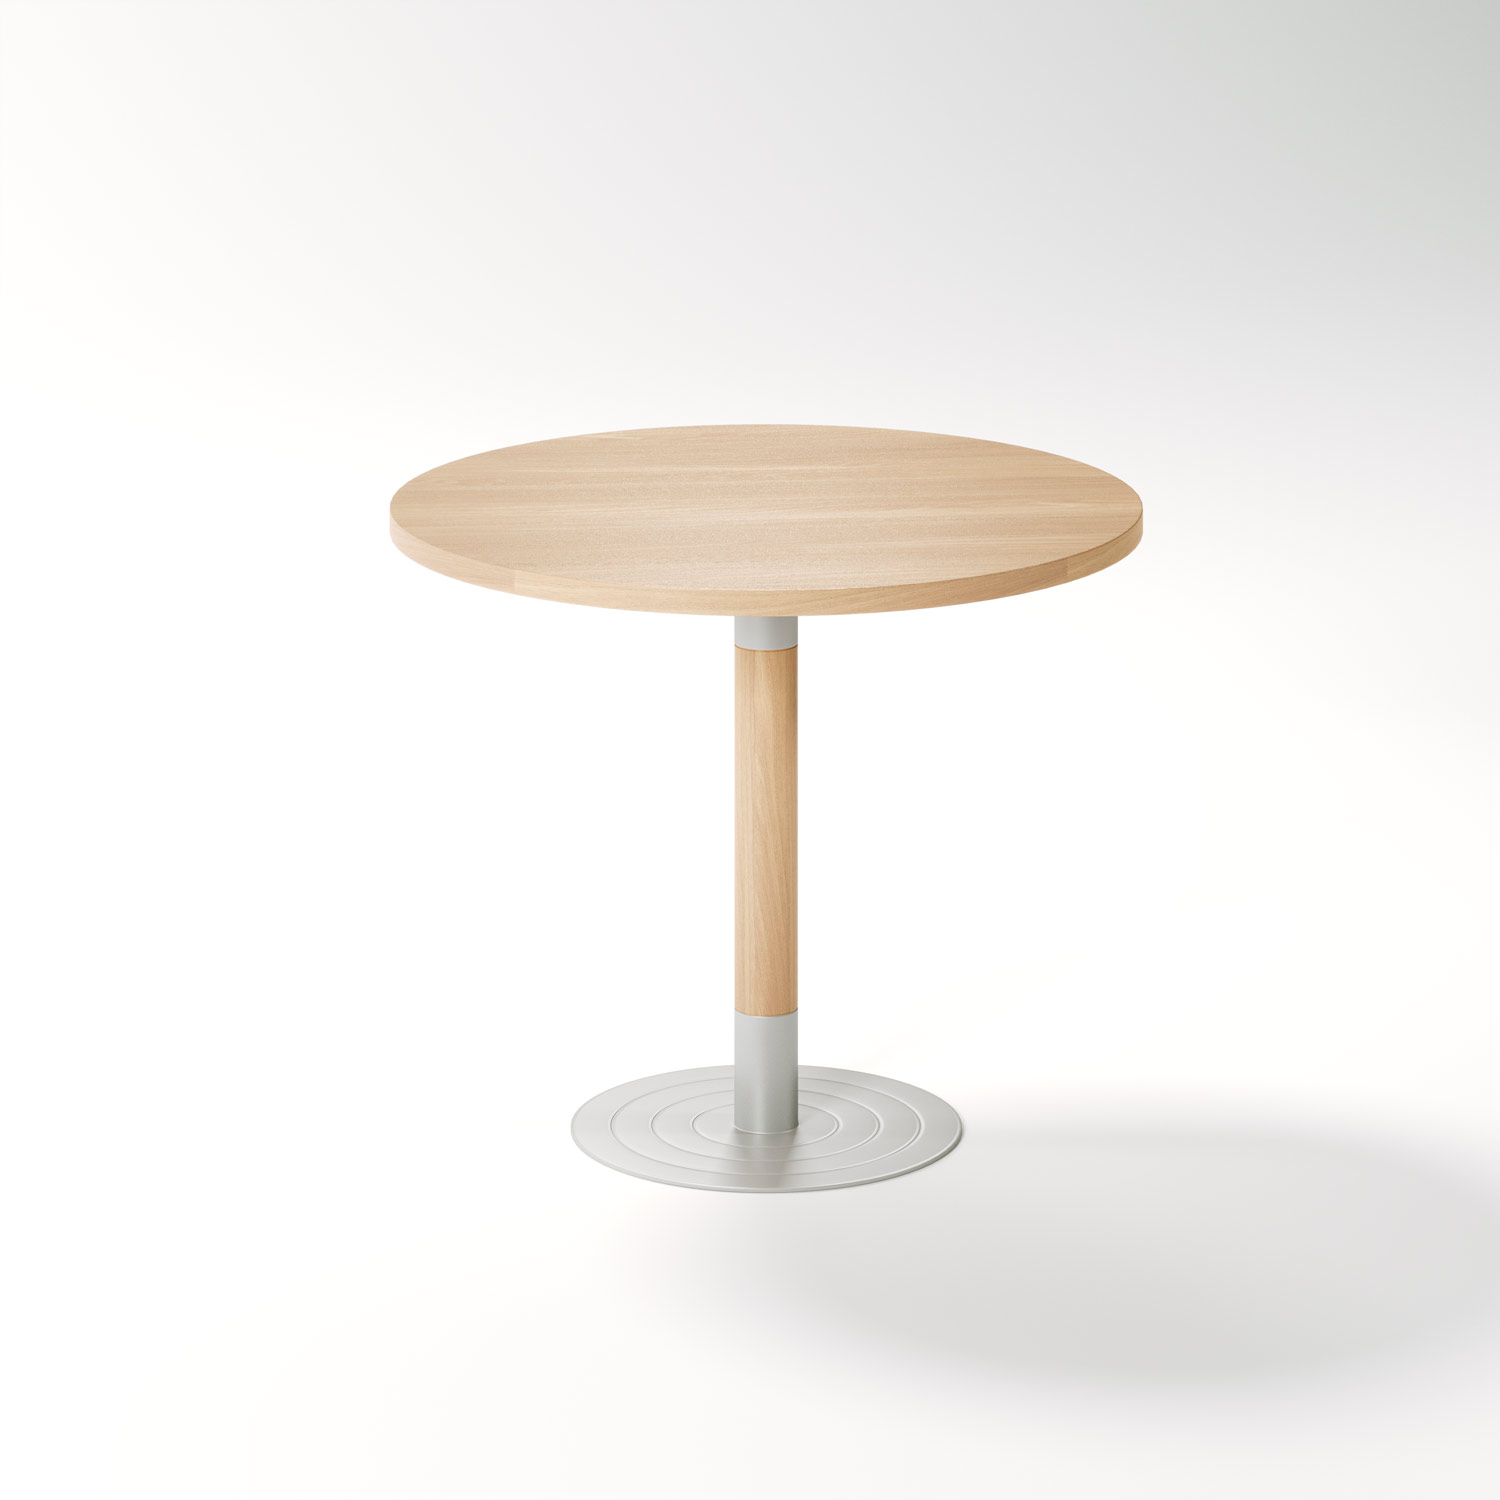 Aged Care Dining Stem Round Pedestal Table, side view